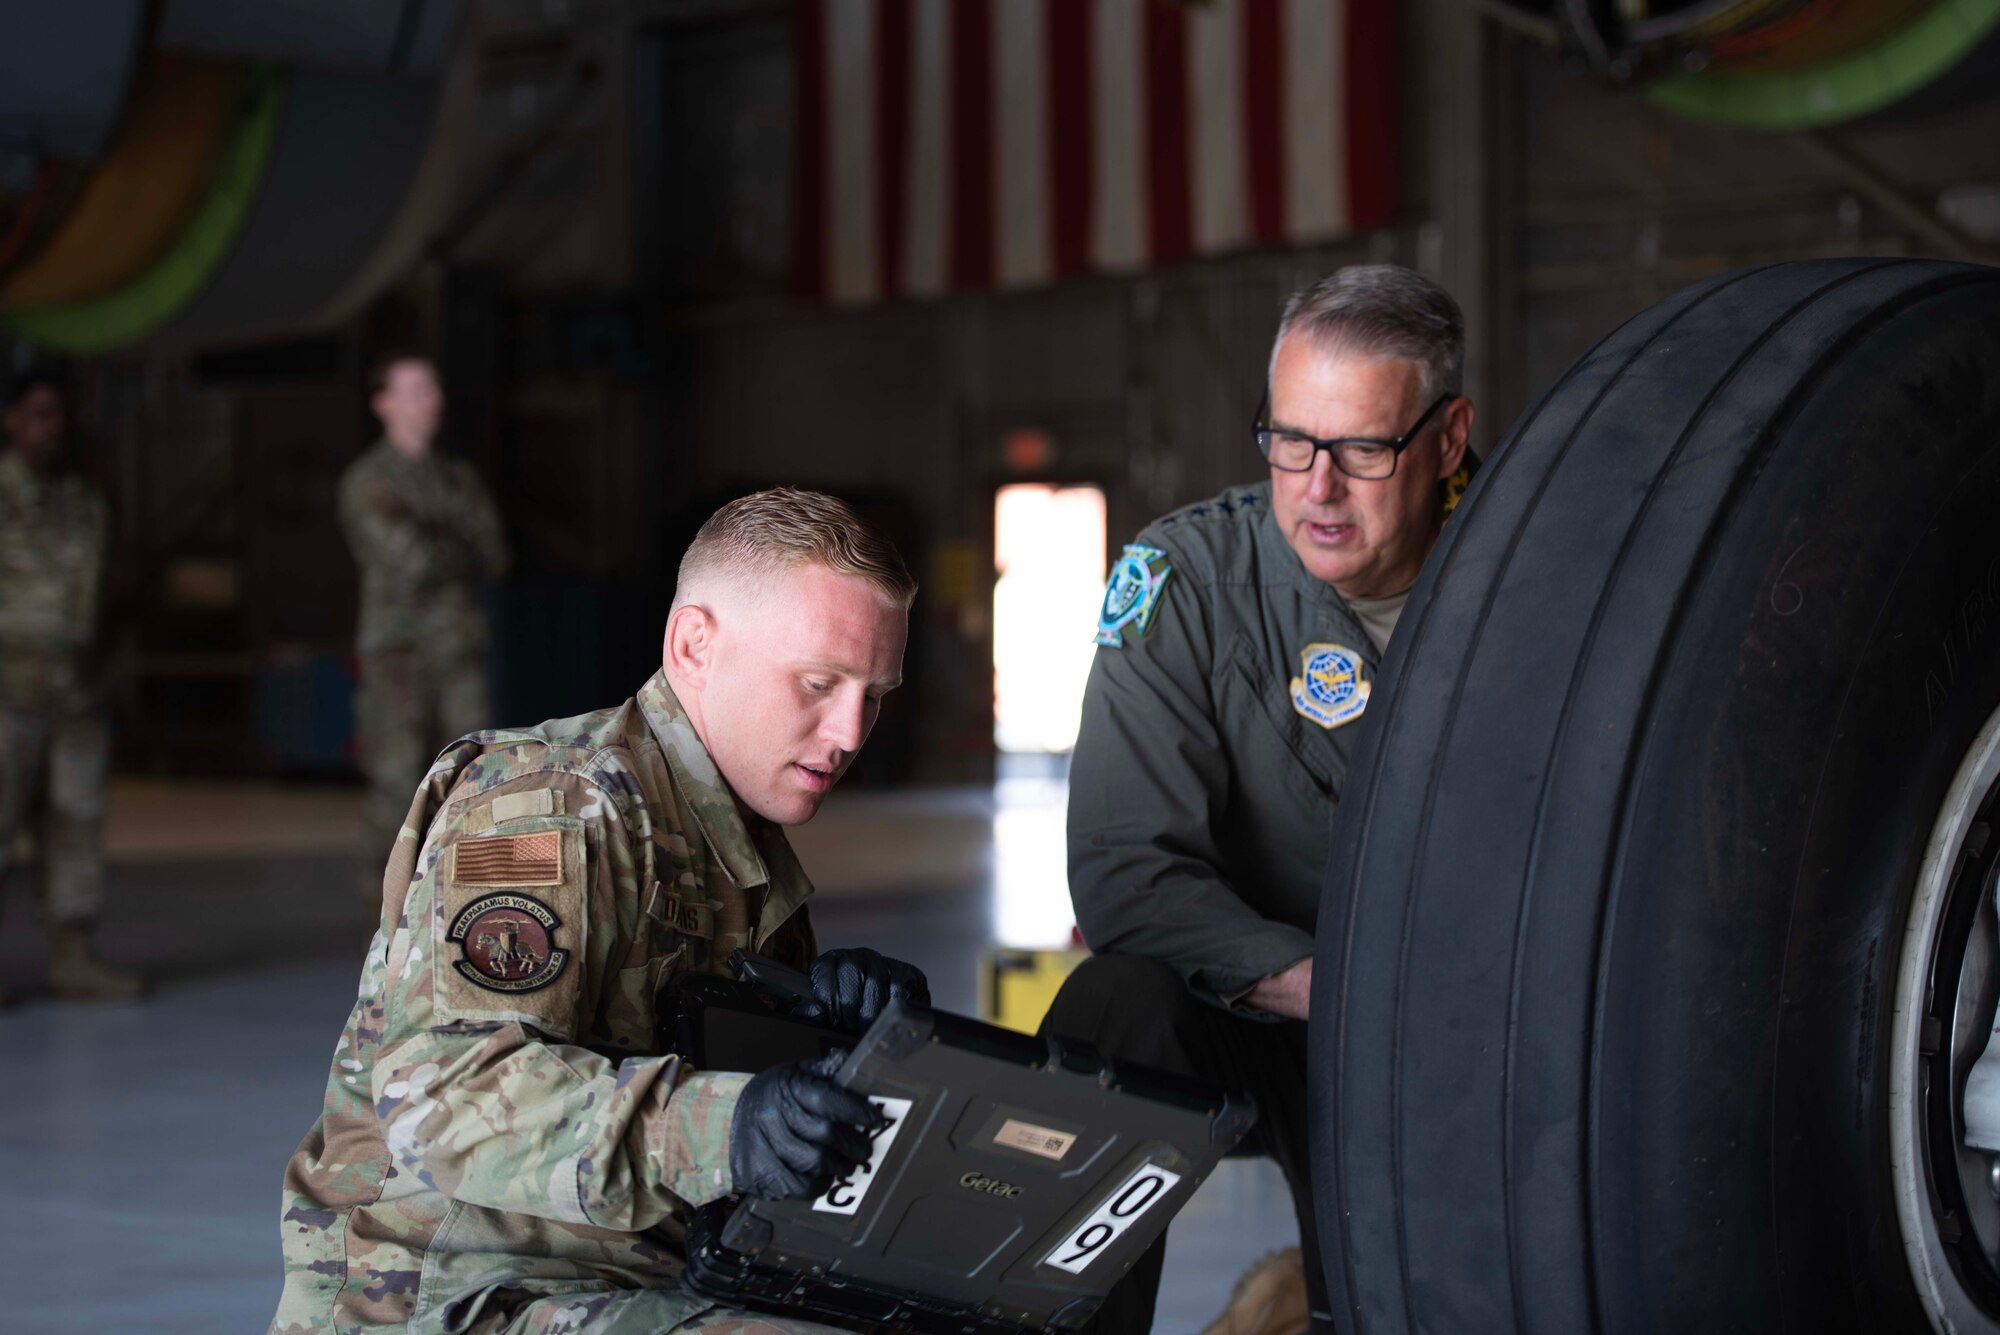 An Airman shows another Airman a computer behind a large tire.